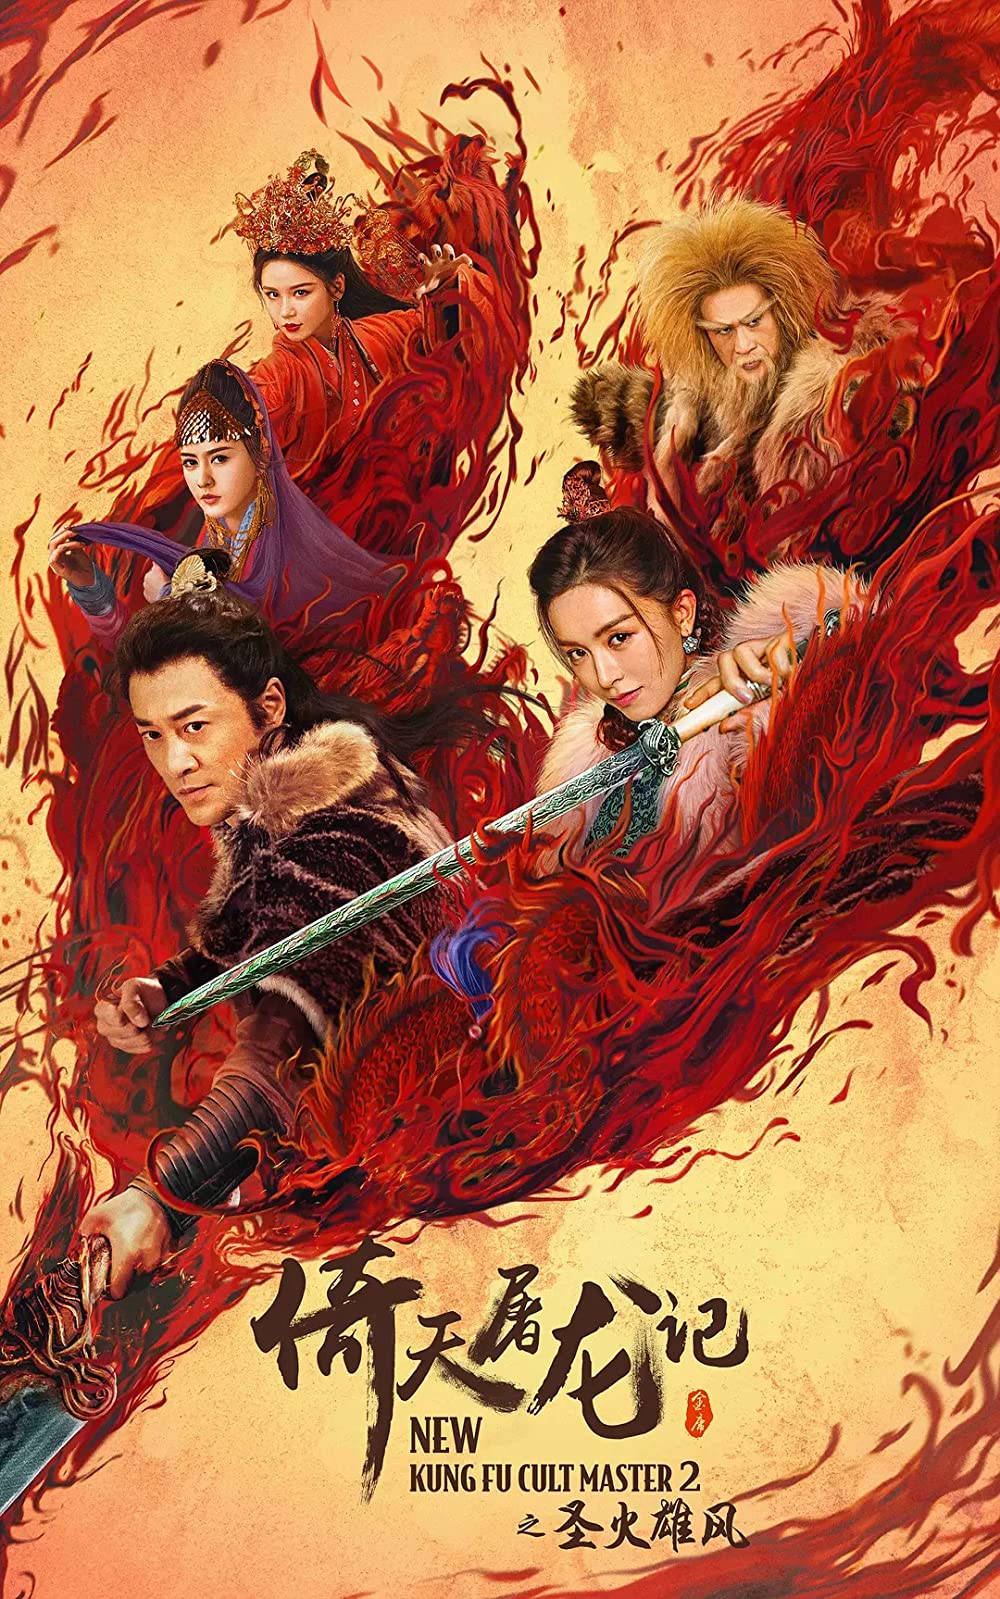 New Kung Fu Cult Master 2 2022 Chinese Movie 480p HDRip ESub 450MB Download